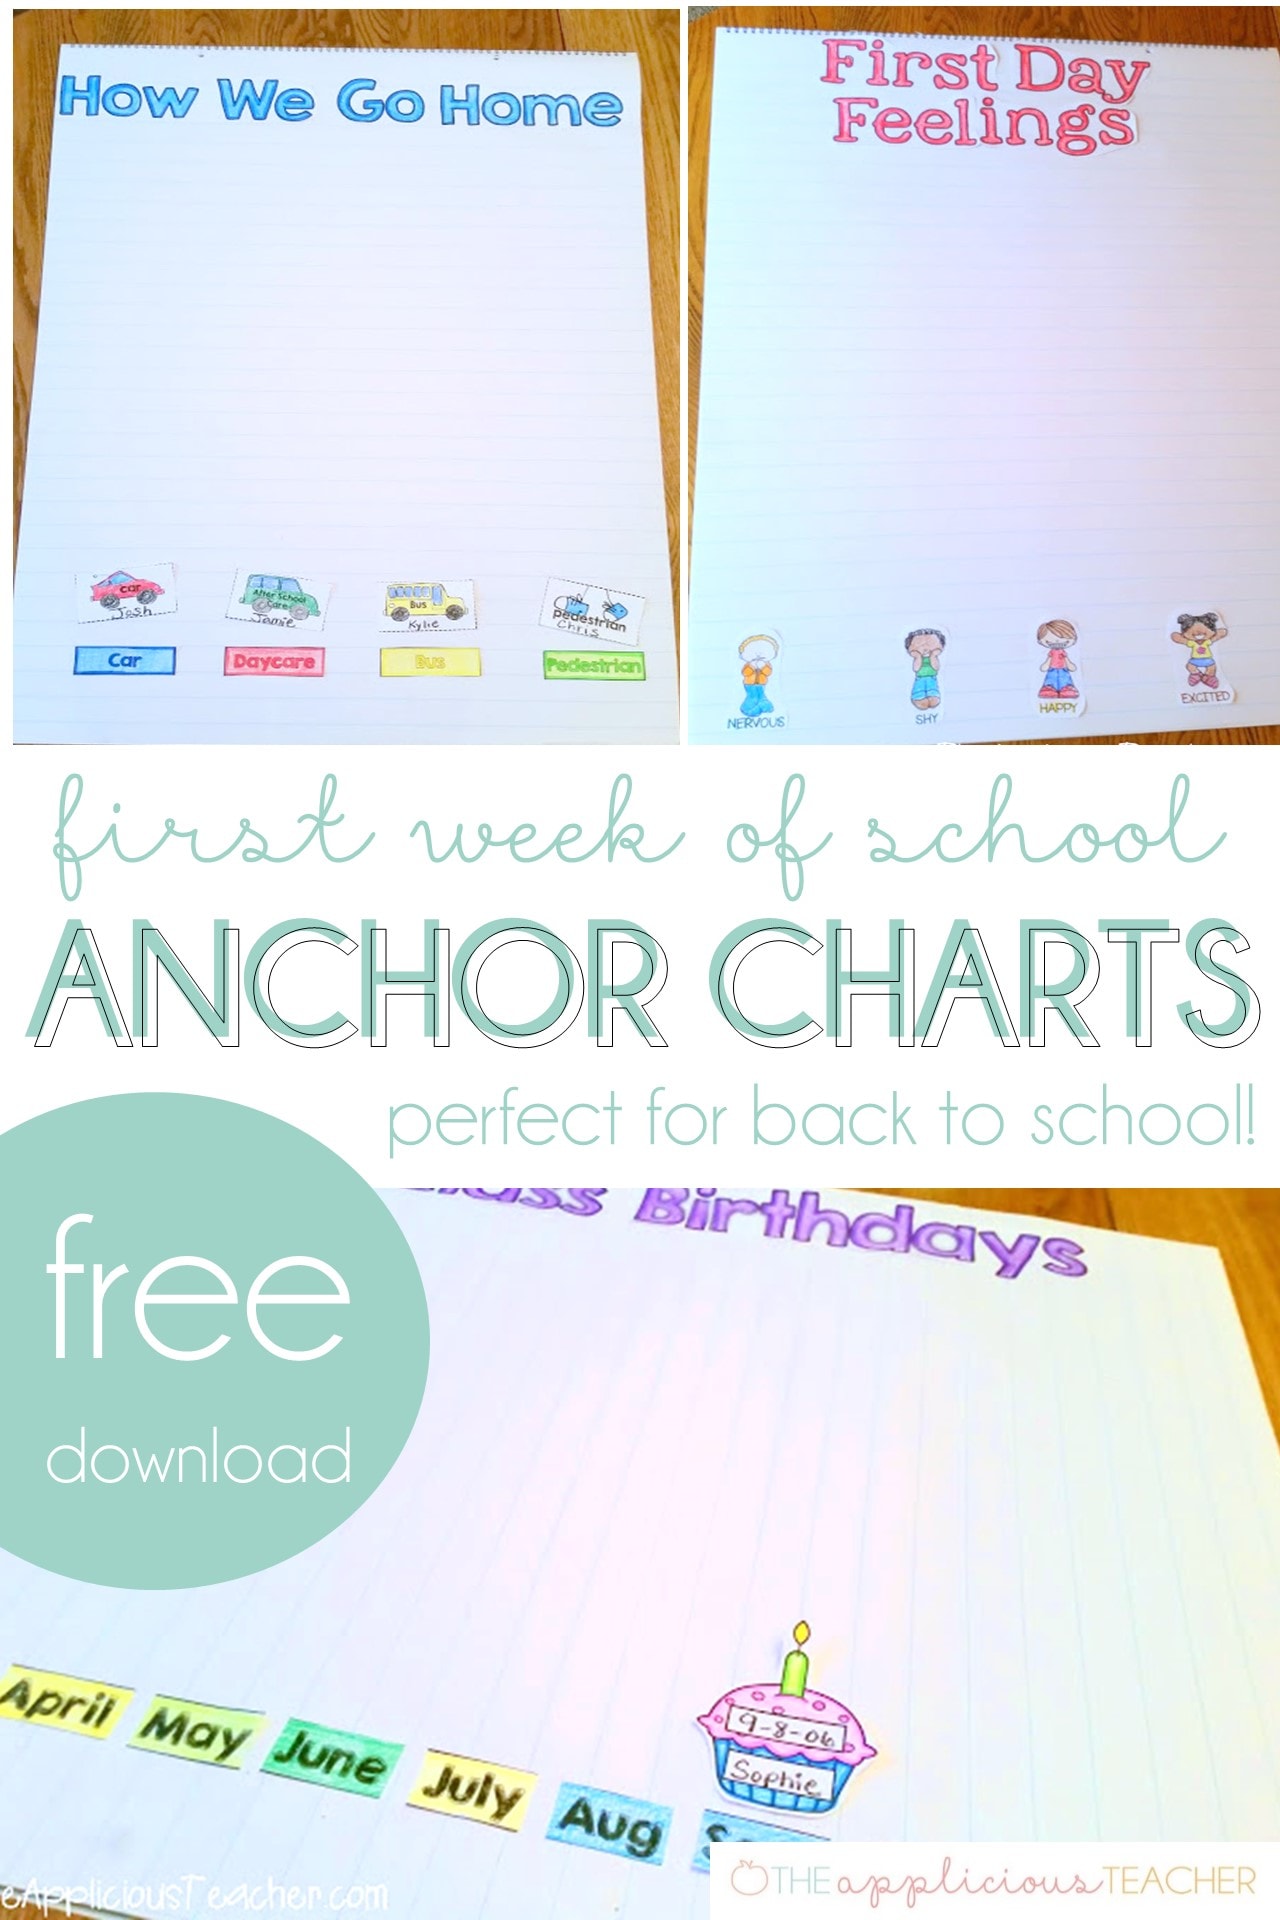 First week of school anchor charts- I love these first week of school anchor charts- perfect for math activity. Free download includes: birthday chart, how we go home chart, and first day feelings chart- TheAppliciousTeacher.com #firstweekofschool #backtoschool #anchorchart